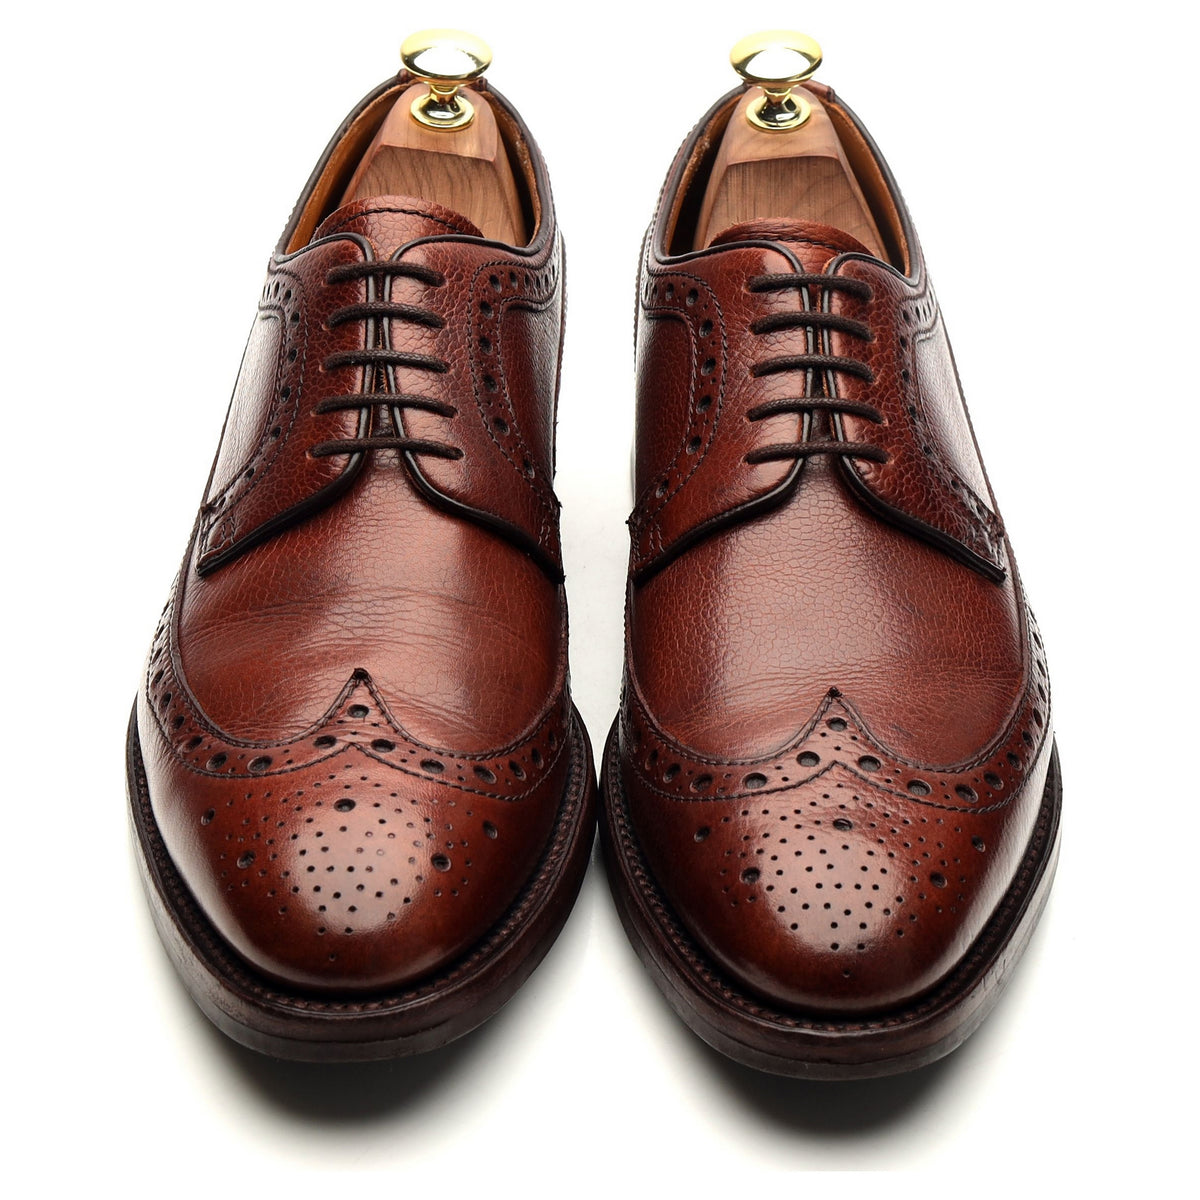 'Calvay' Brown Leather Derby Brogues UK 7.5 F - Abbot's Shoes